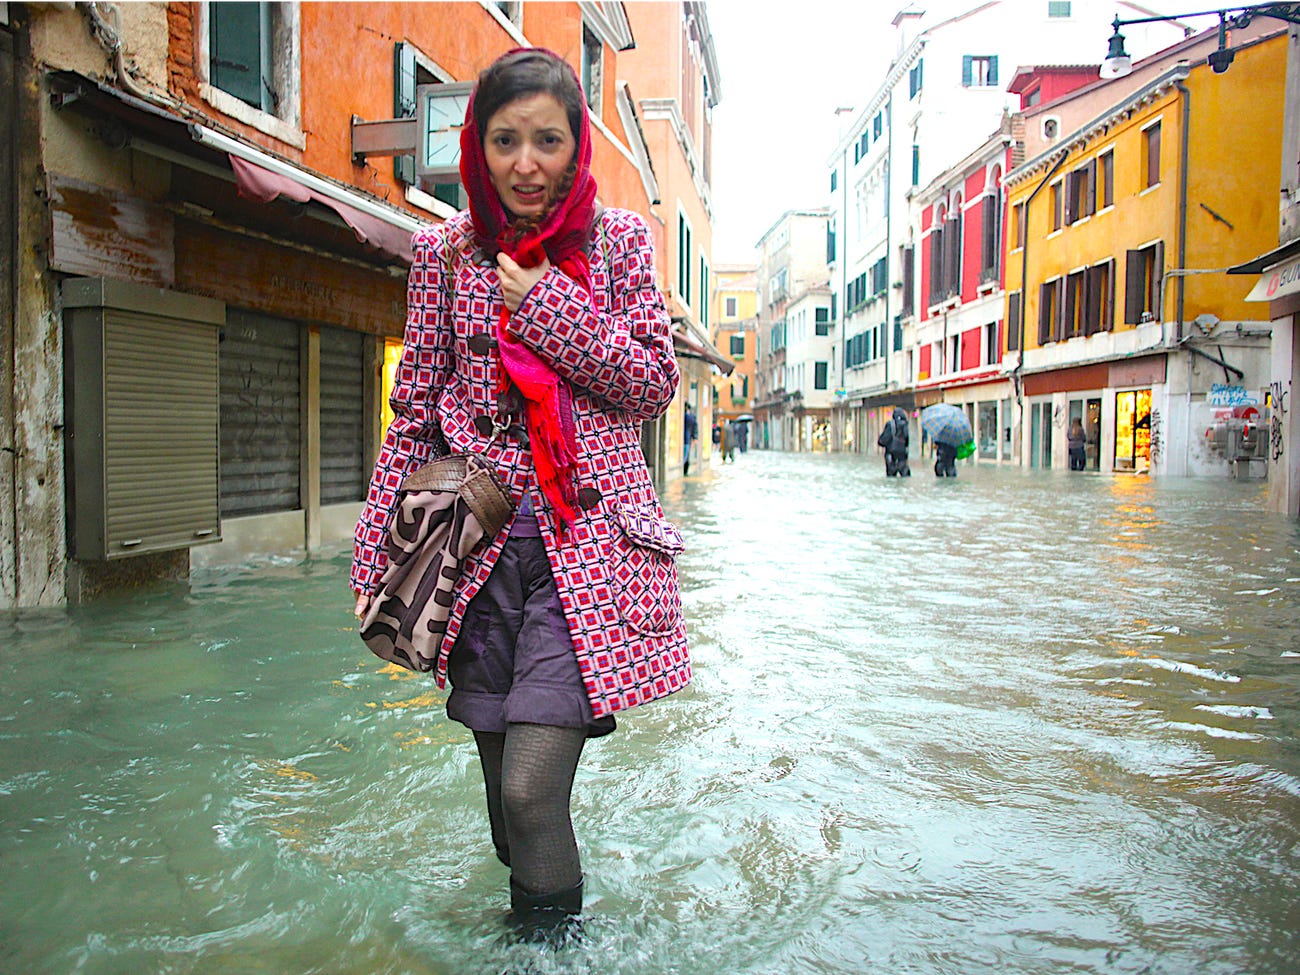 A woman walks in a flooded street during a period of seasonal high water in Venice, Italy, November 11, 2012. The water level in the canal city rose to 149 cm (59 inches) above normal. REUTERS/Manuel Silvestri